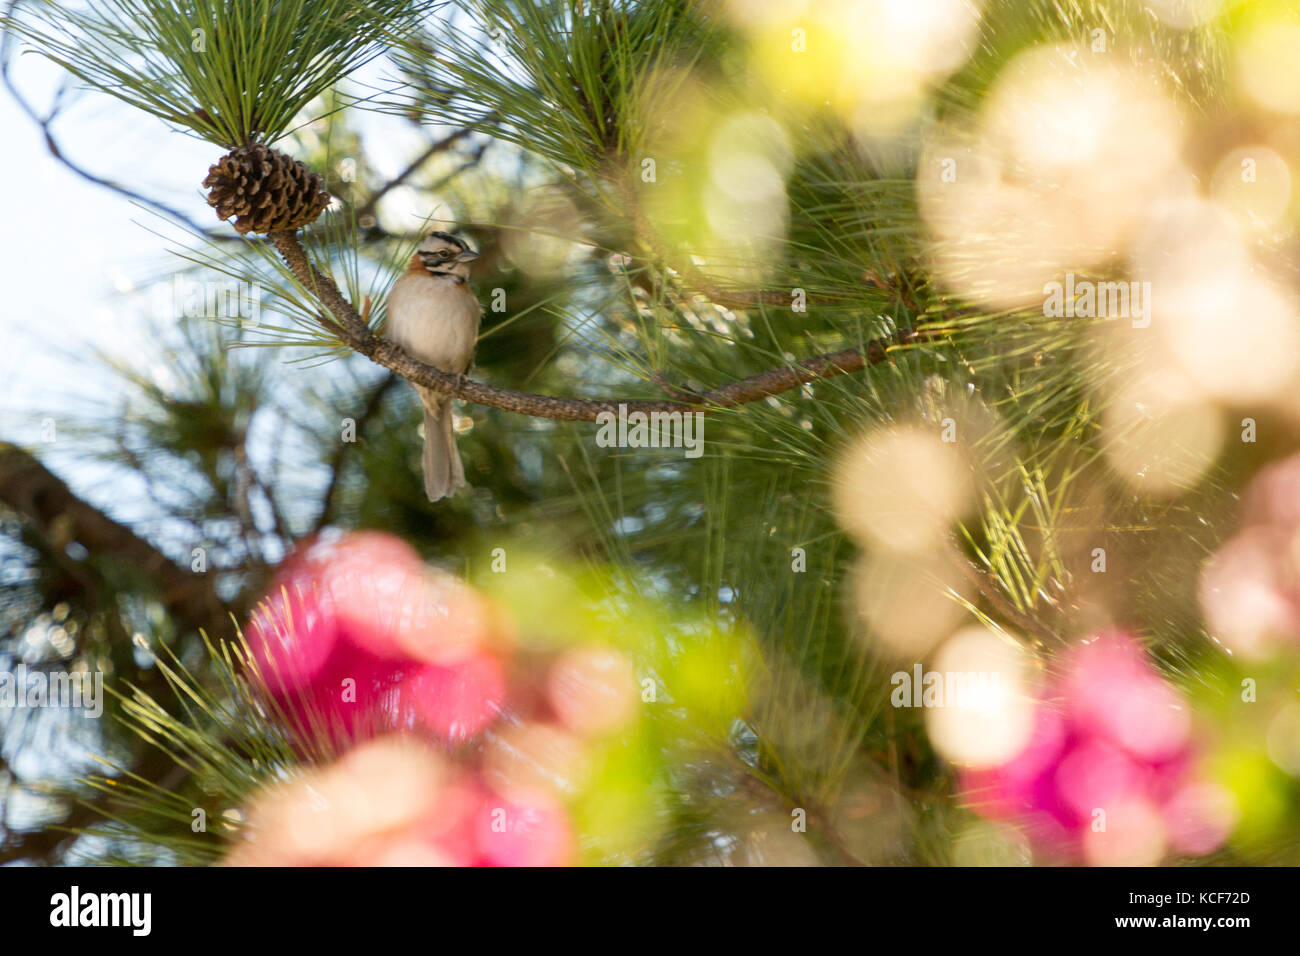 Rufous-collared sparrow (Zonotrichia capensis) bird takes a rest on pine tree, sunny day, blurred flowers in the foreground, Asuncion, Paraguay Stock Photo